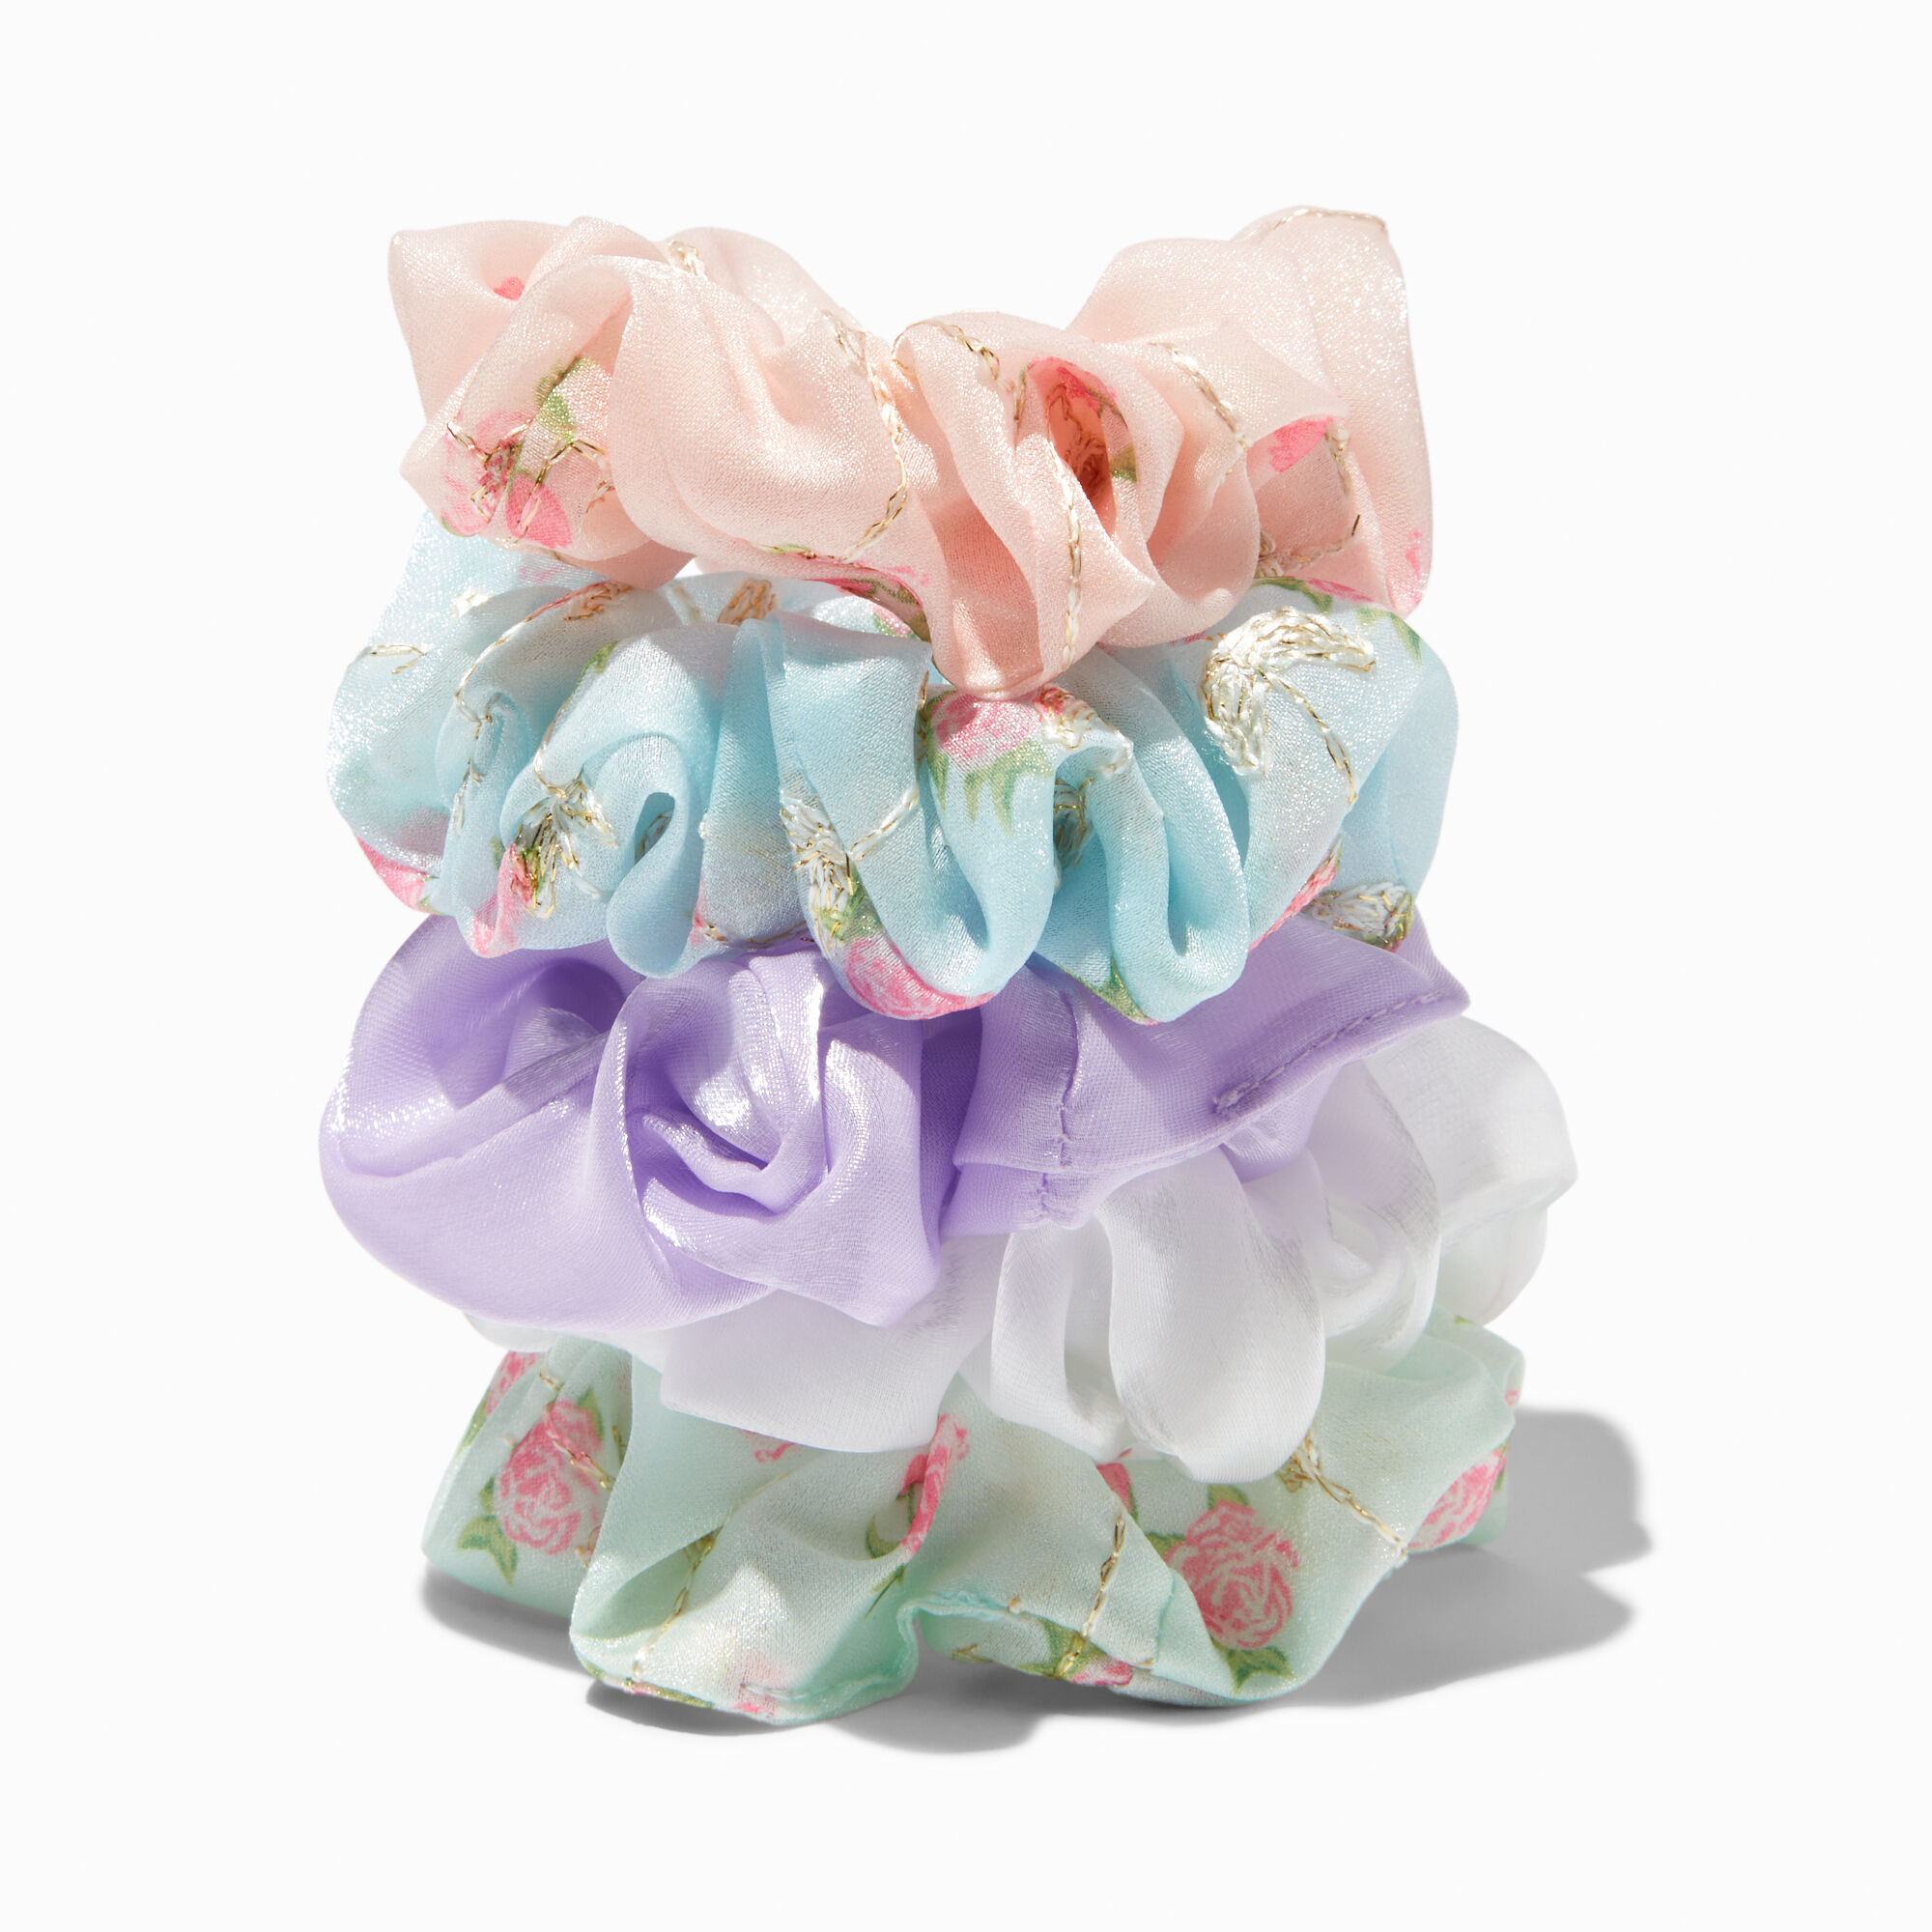 View Claires Rose Print Solid Sheer Pastel Hair Scrunchies 5 Pack Bracelet White information